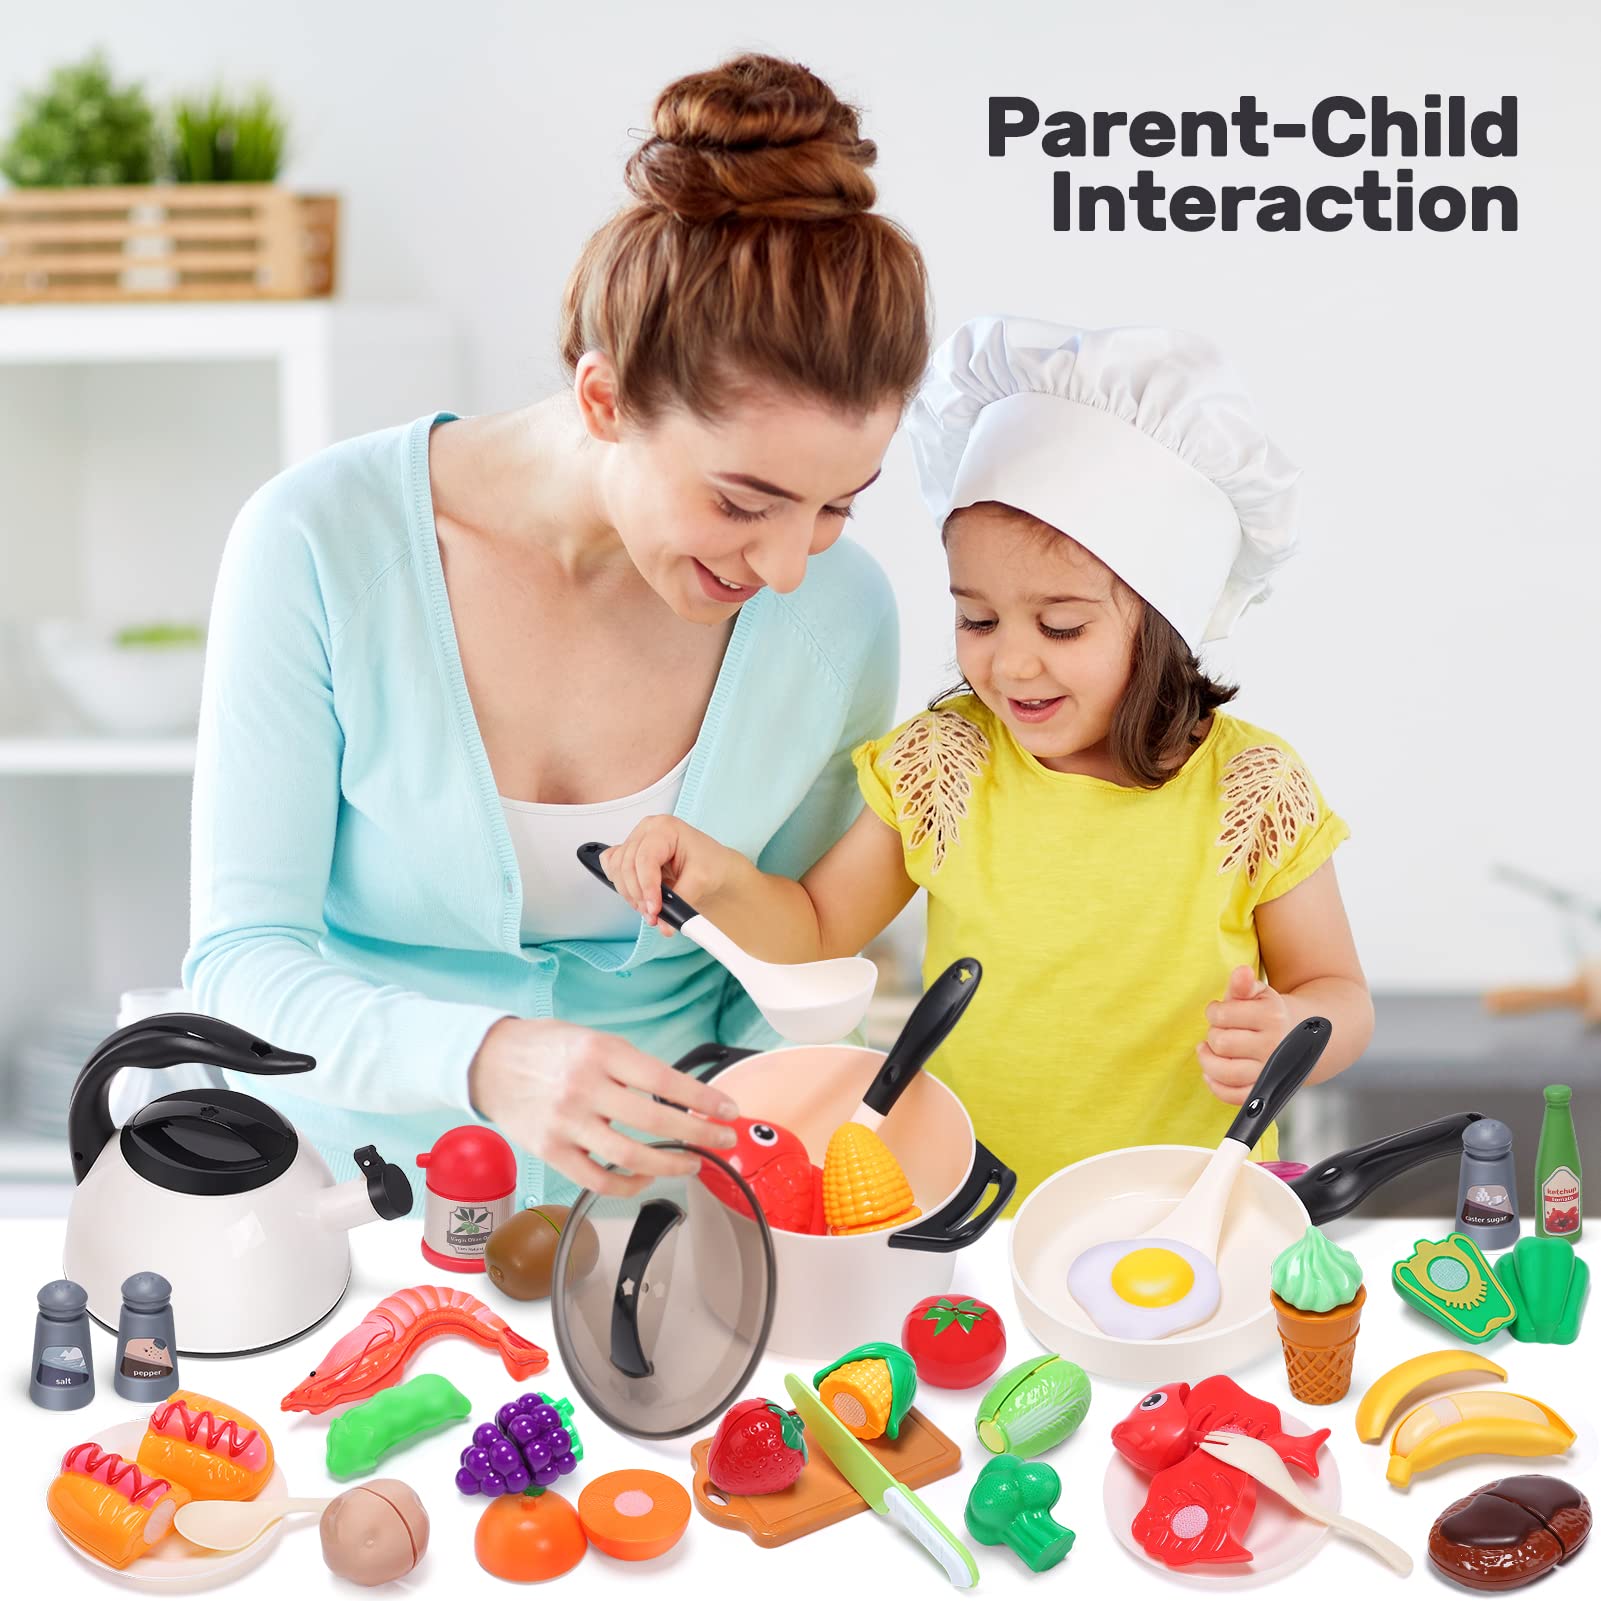  Cute Stone Kids Kitchen Pretend Play Toys,Play Cooking Set,  Cookware Pots and Pans Playset, Peeling and Cutting Play Food Toys, Cooking  Utensils Accessories, Learning Gift for Toddlers Baby Girls Boys 